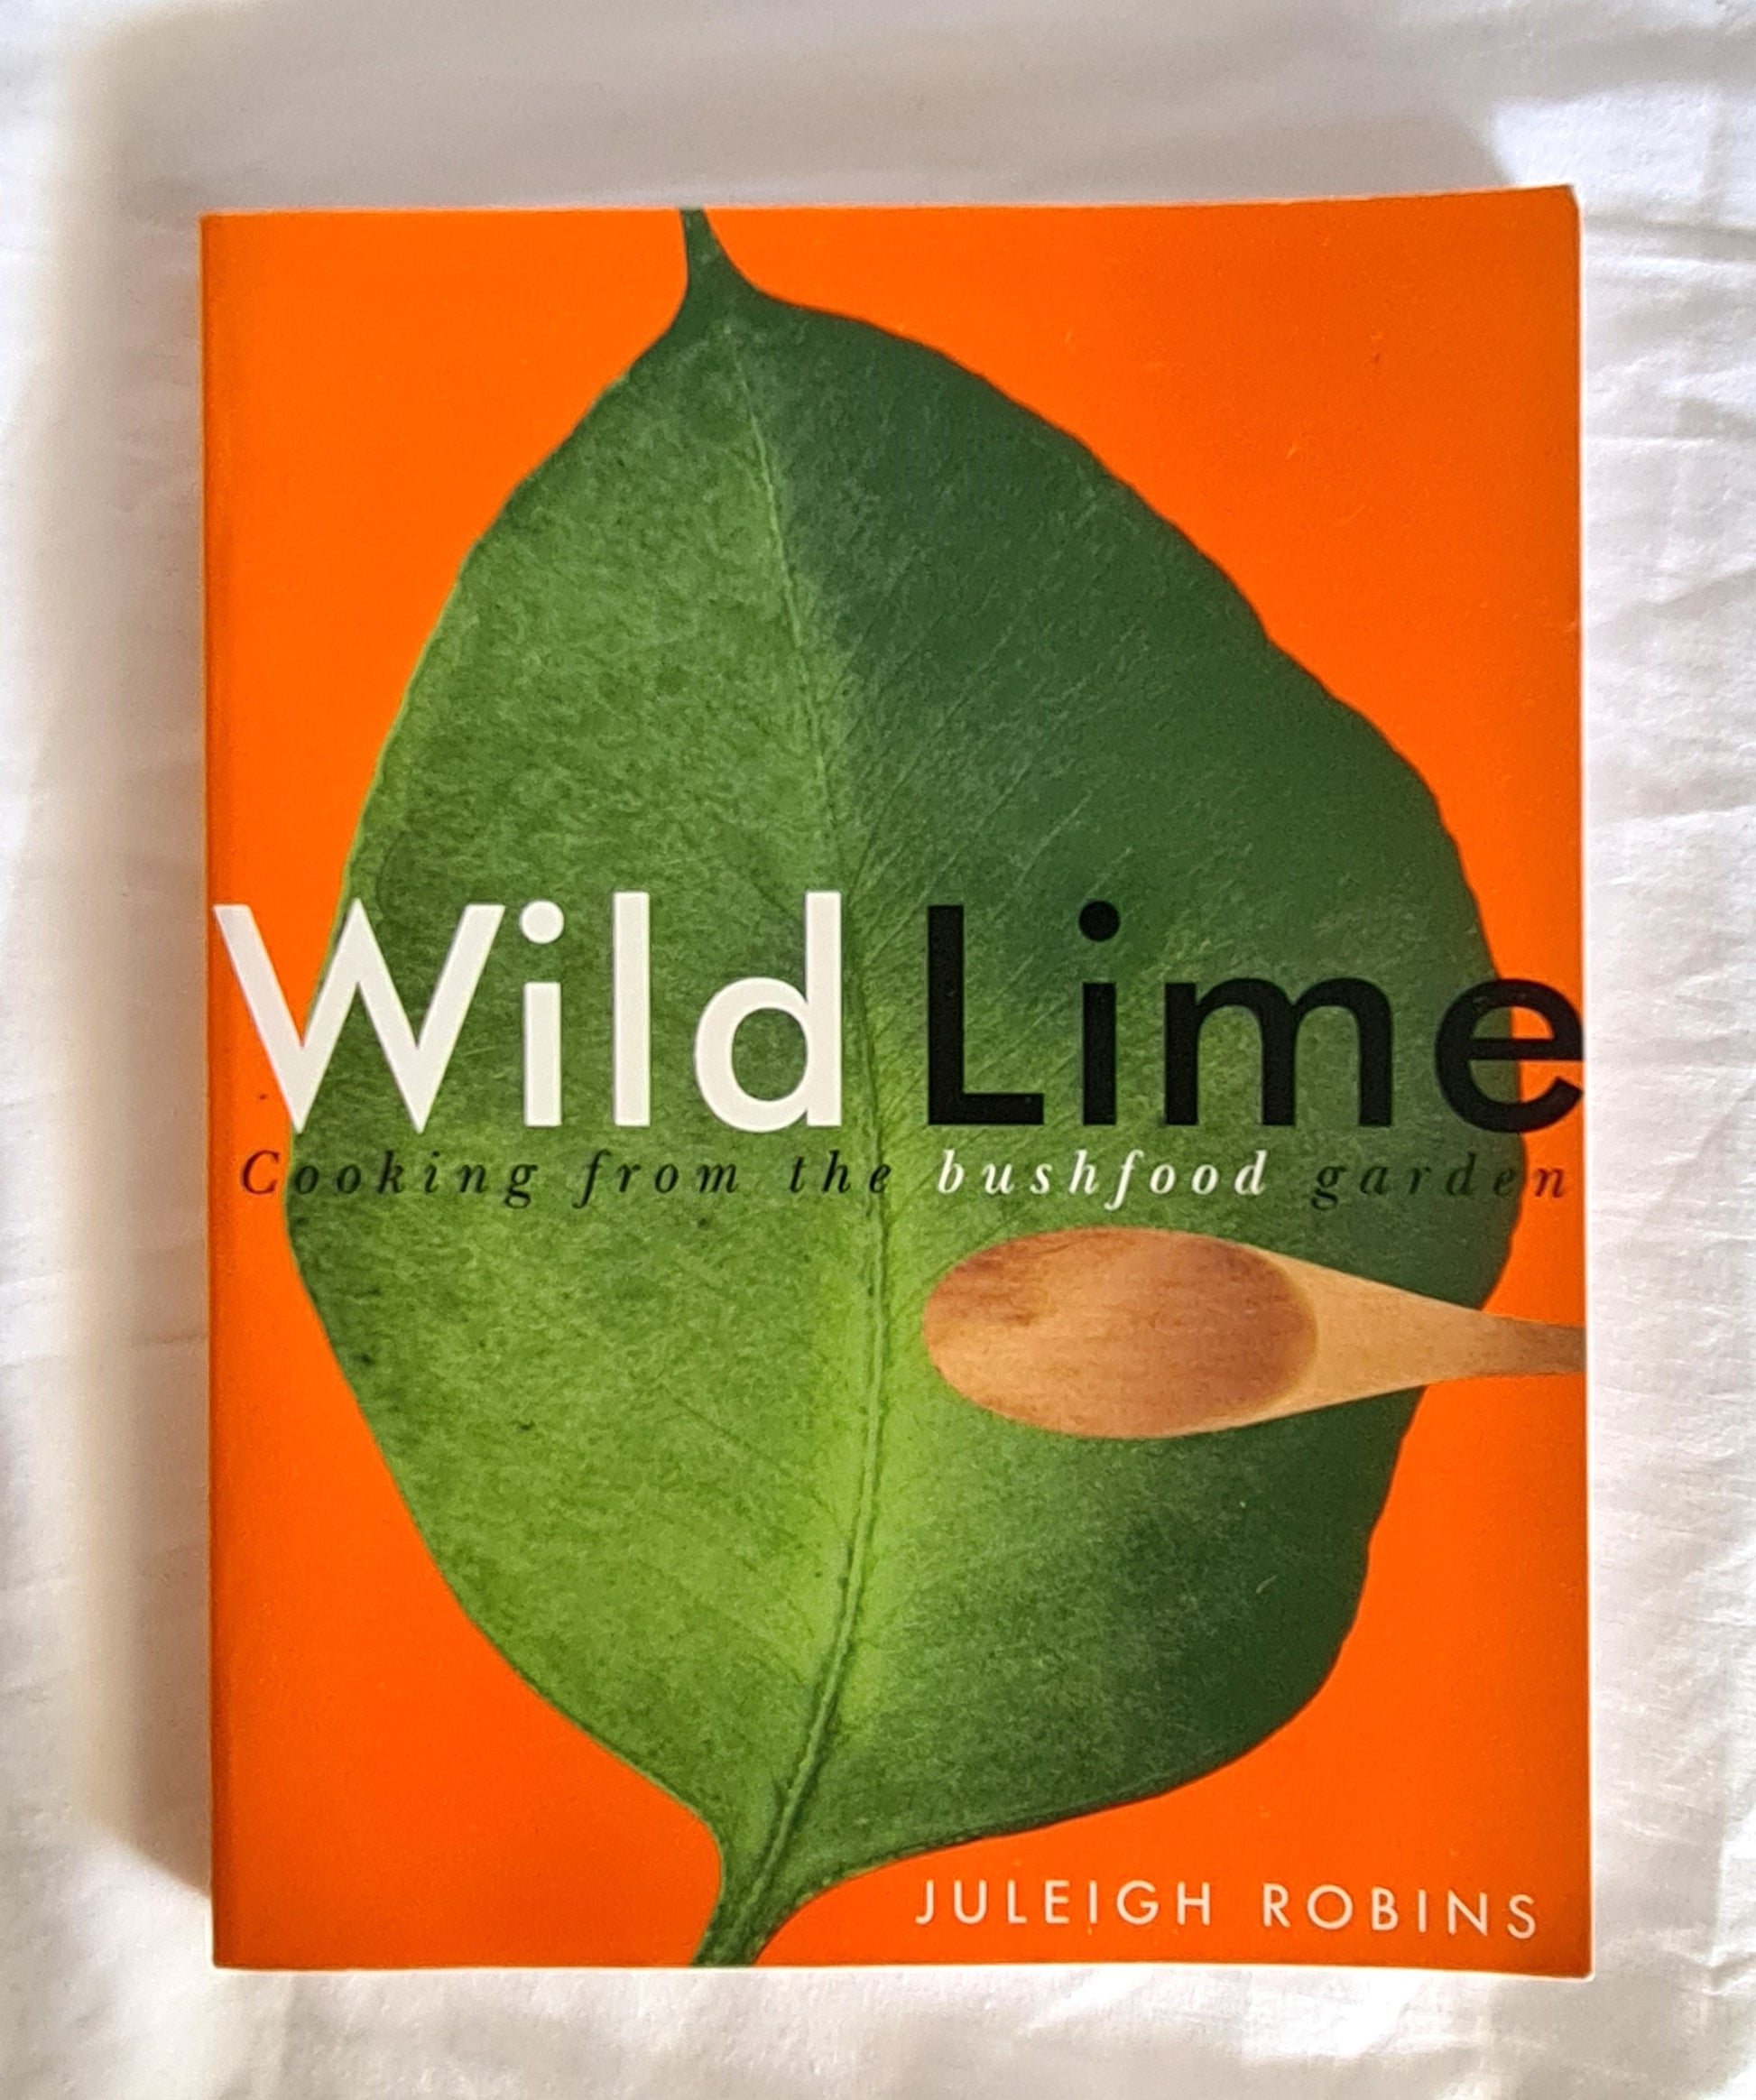 Wild Lime  Cooking from the bushfood garden  by Juleigh Robins